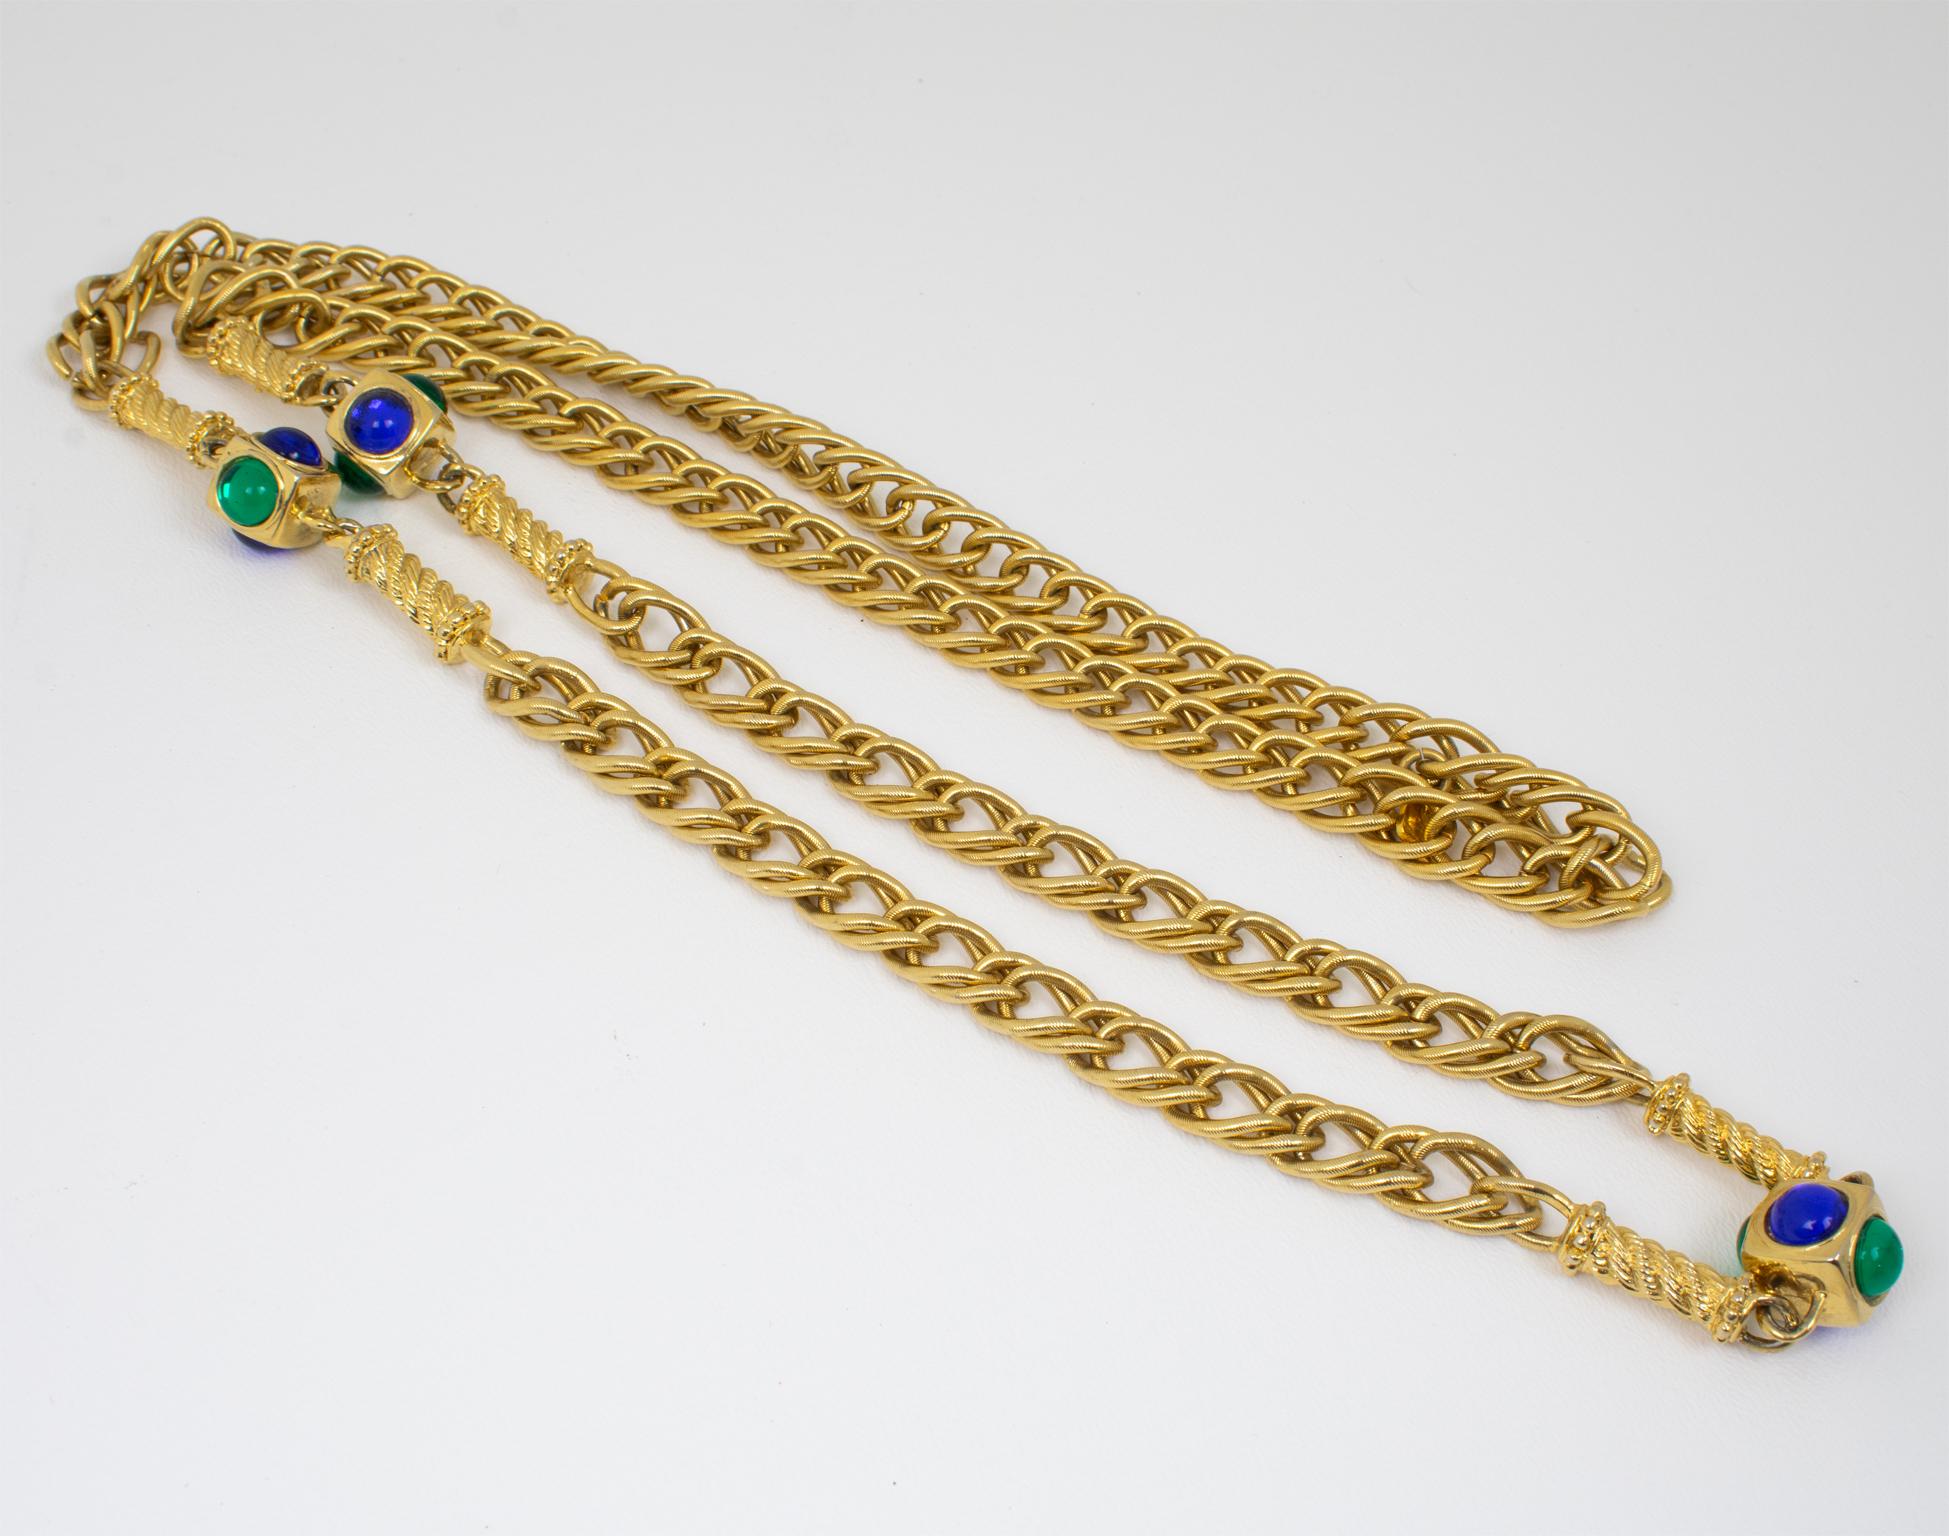 Ungaro Paris Gilt Metal Long Necklace with Blue and Green Resin Cabochons In Excellent Condition For Sale In Atlanta, GA